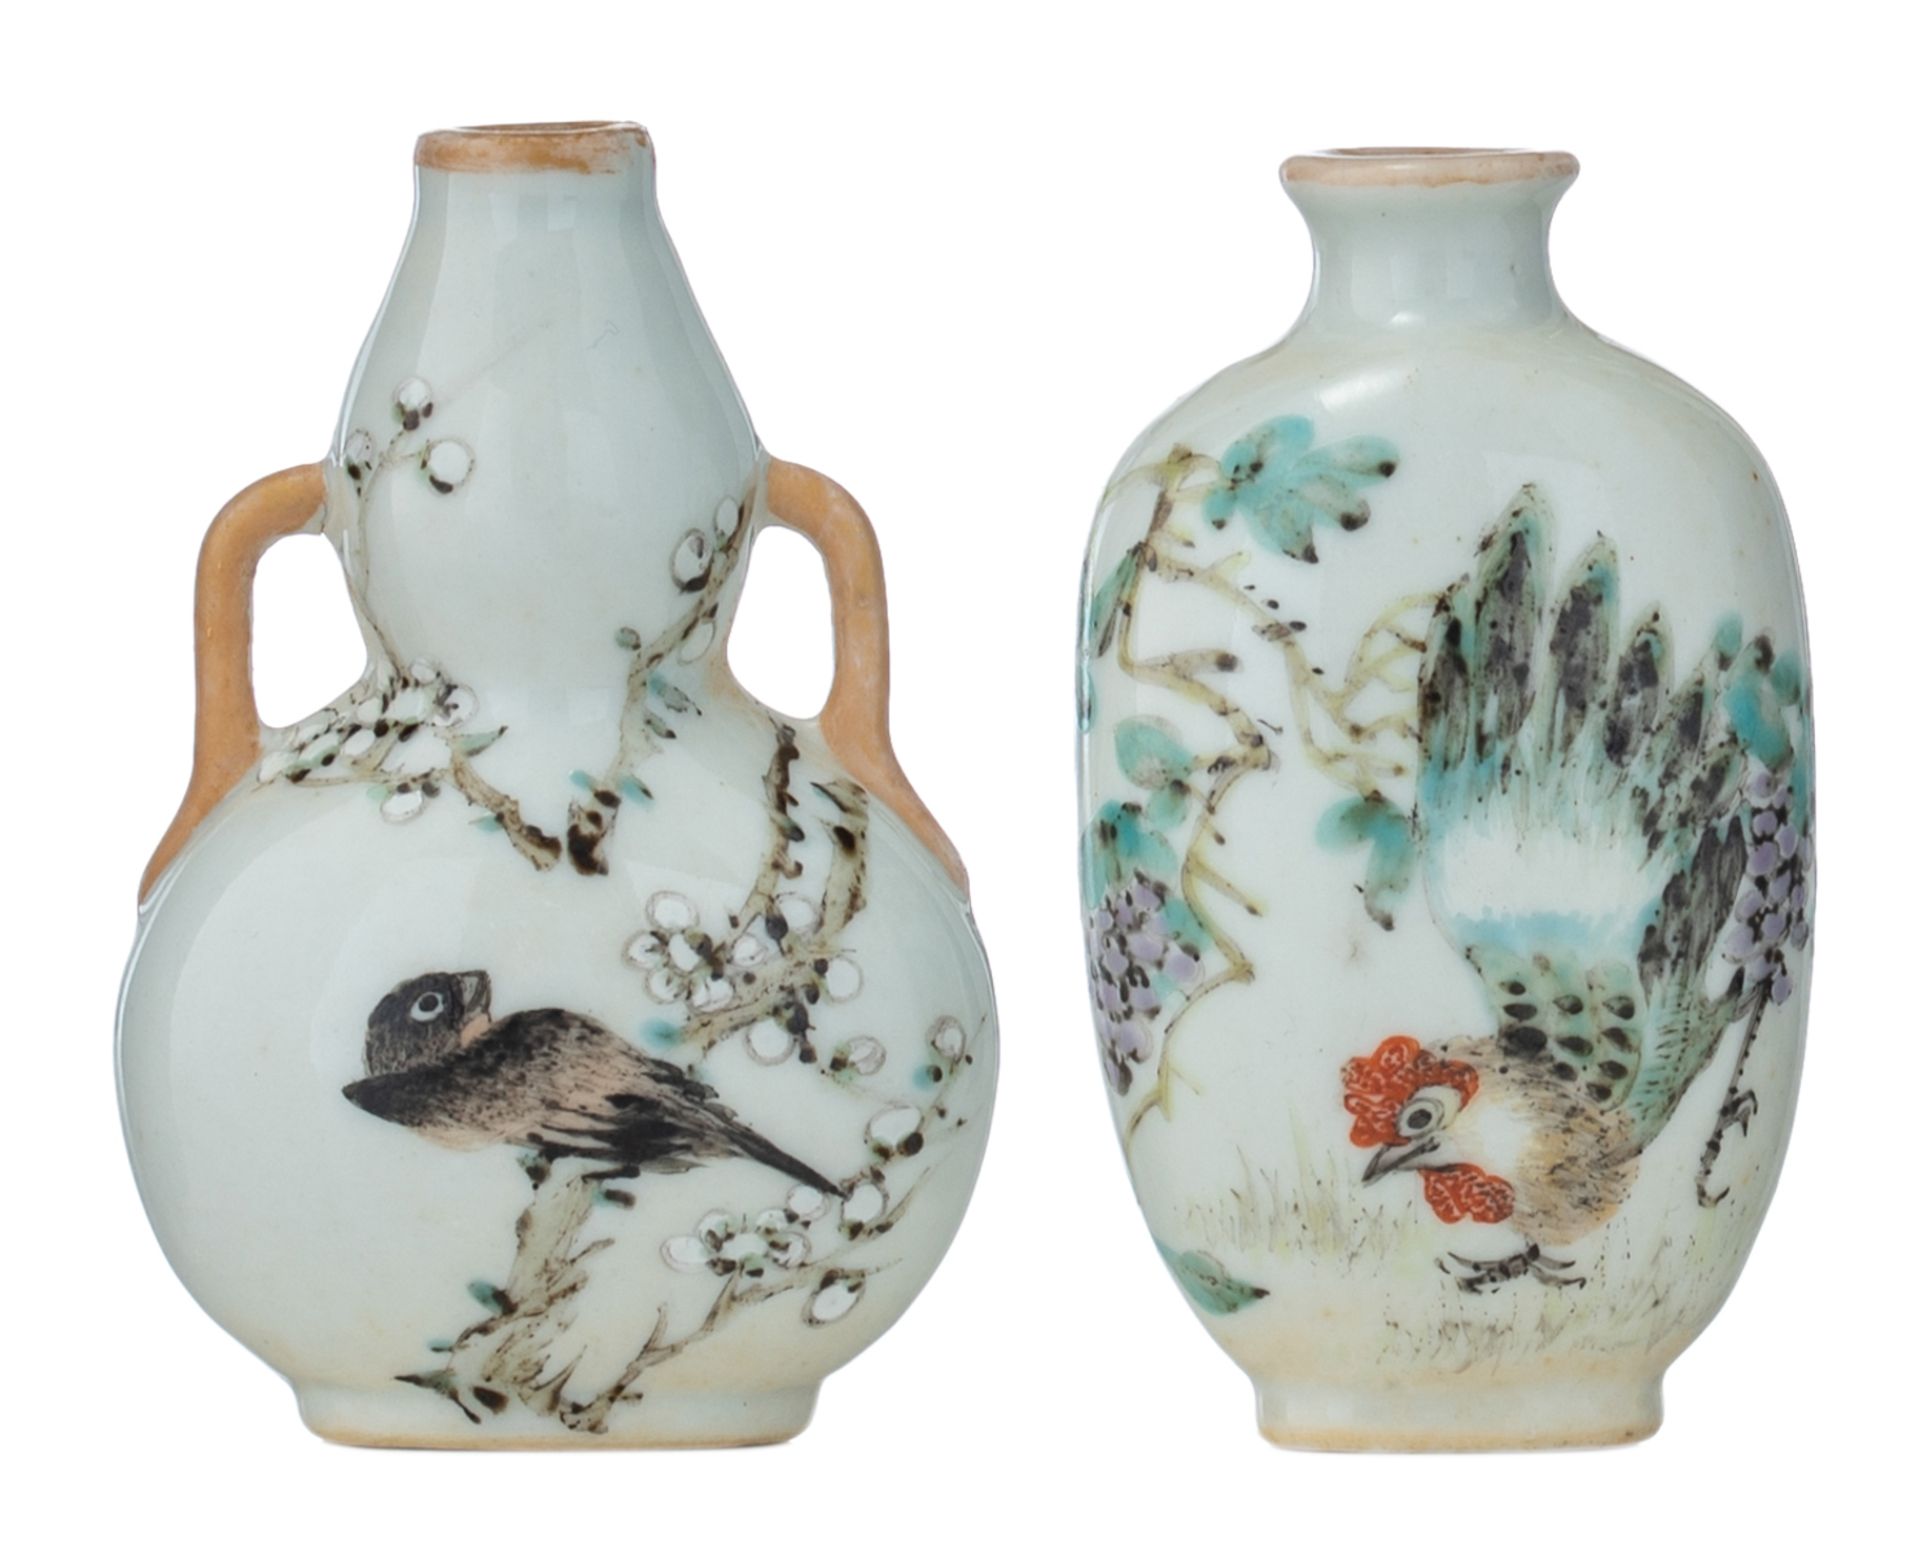 Two Republic period polychrome snuff bottles, one bottle decorated with a cockerel, signed Jin